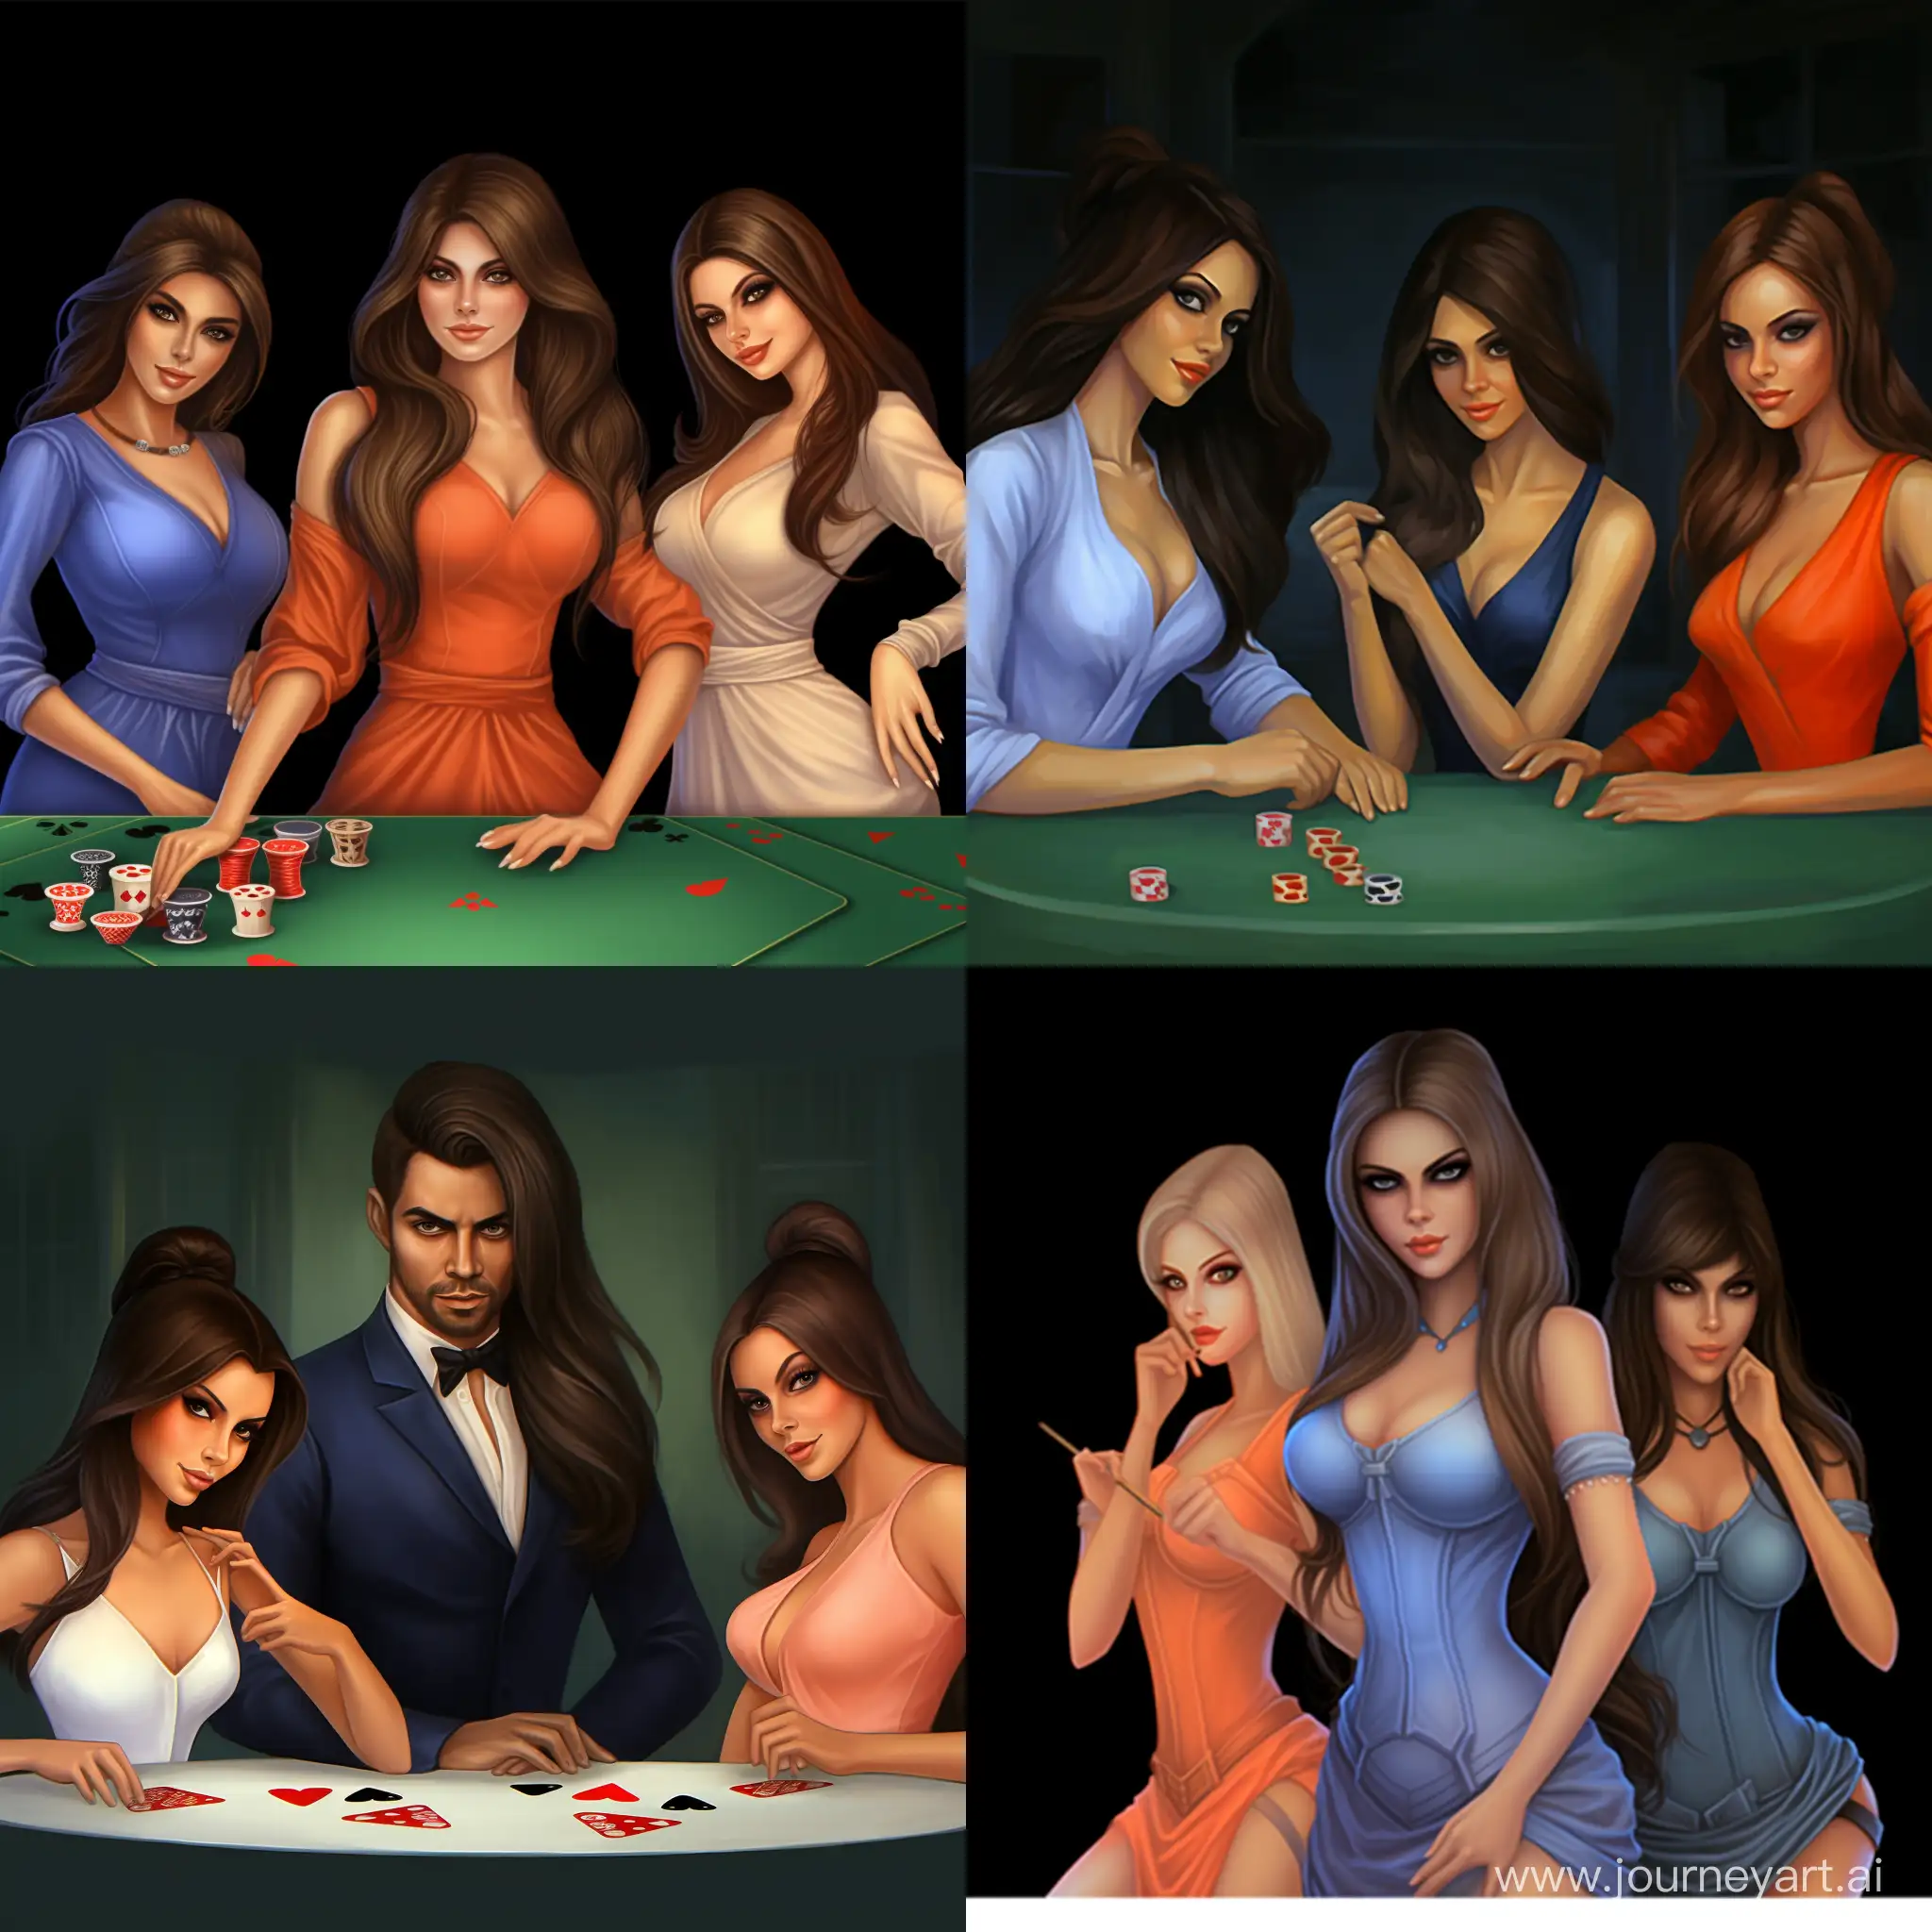 Please, paint picture with 3 good-looking girls. They are business ladies. First-one the artist, second-one the IT specialist, and third one the game expert. They make money.
